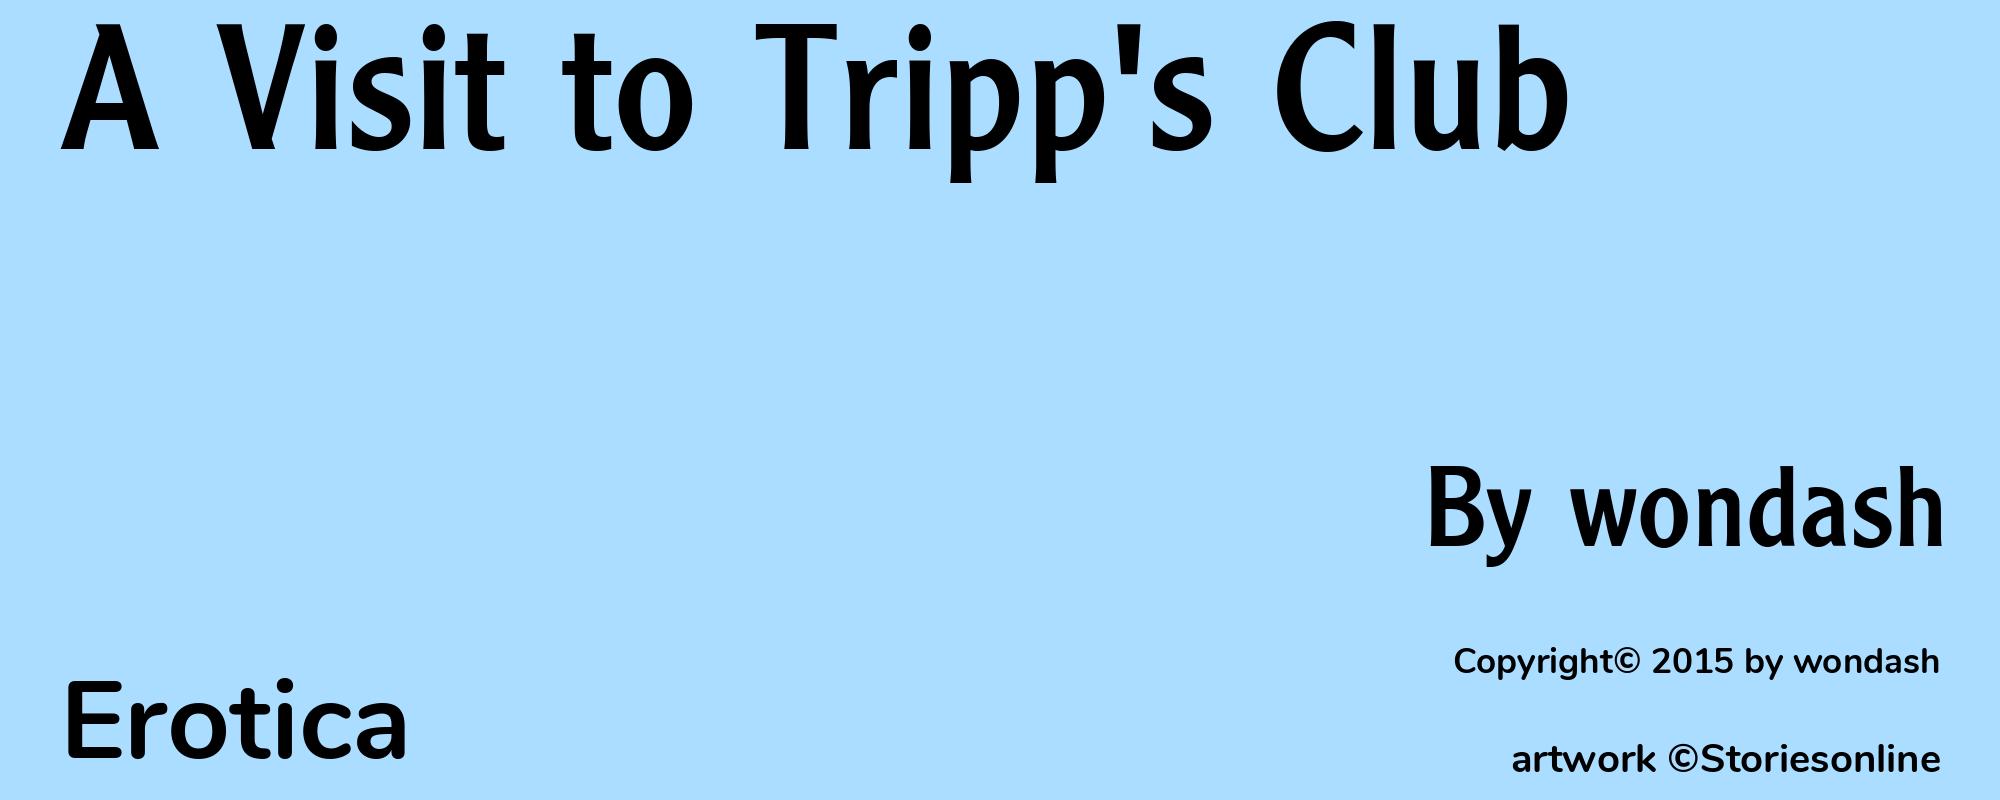 A Visit to Tripp's Club - Cover